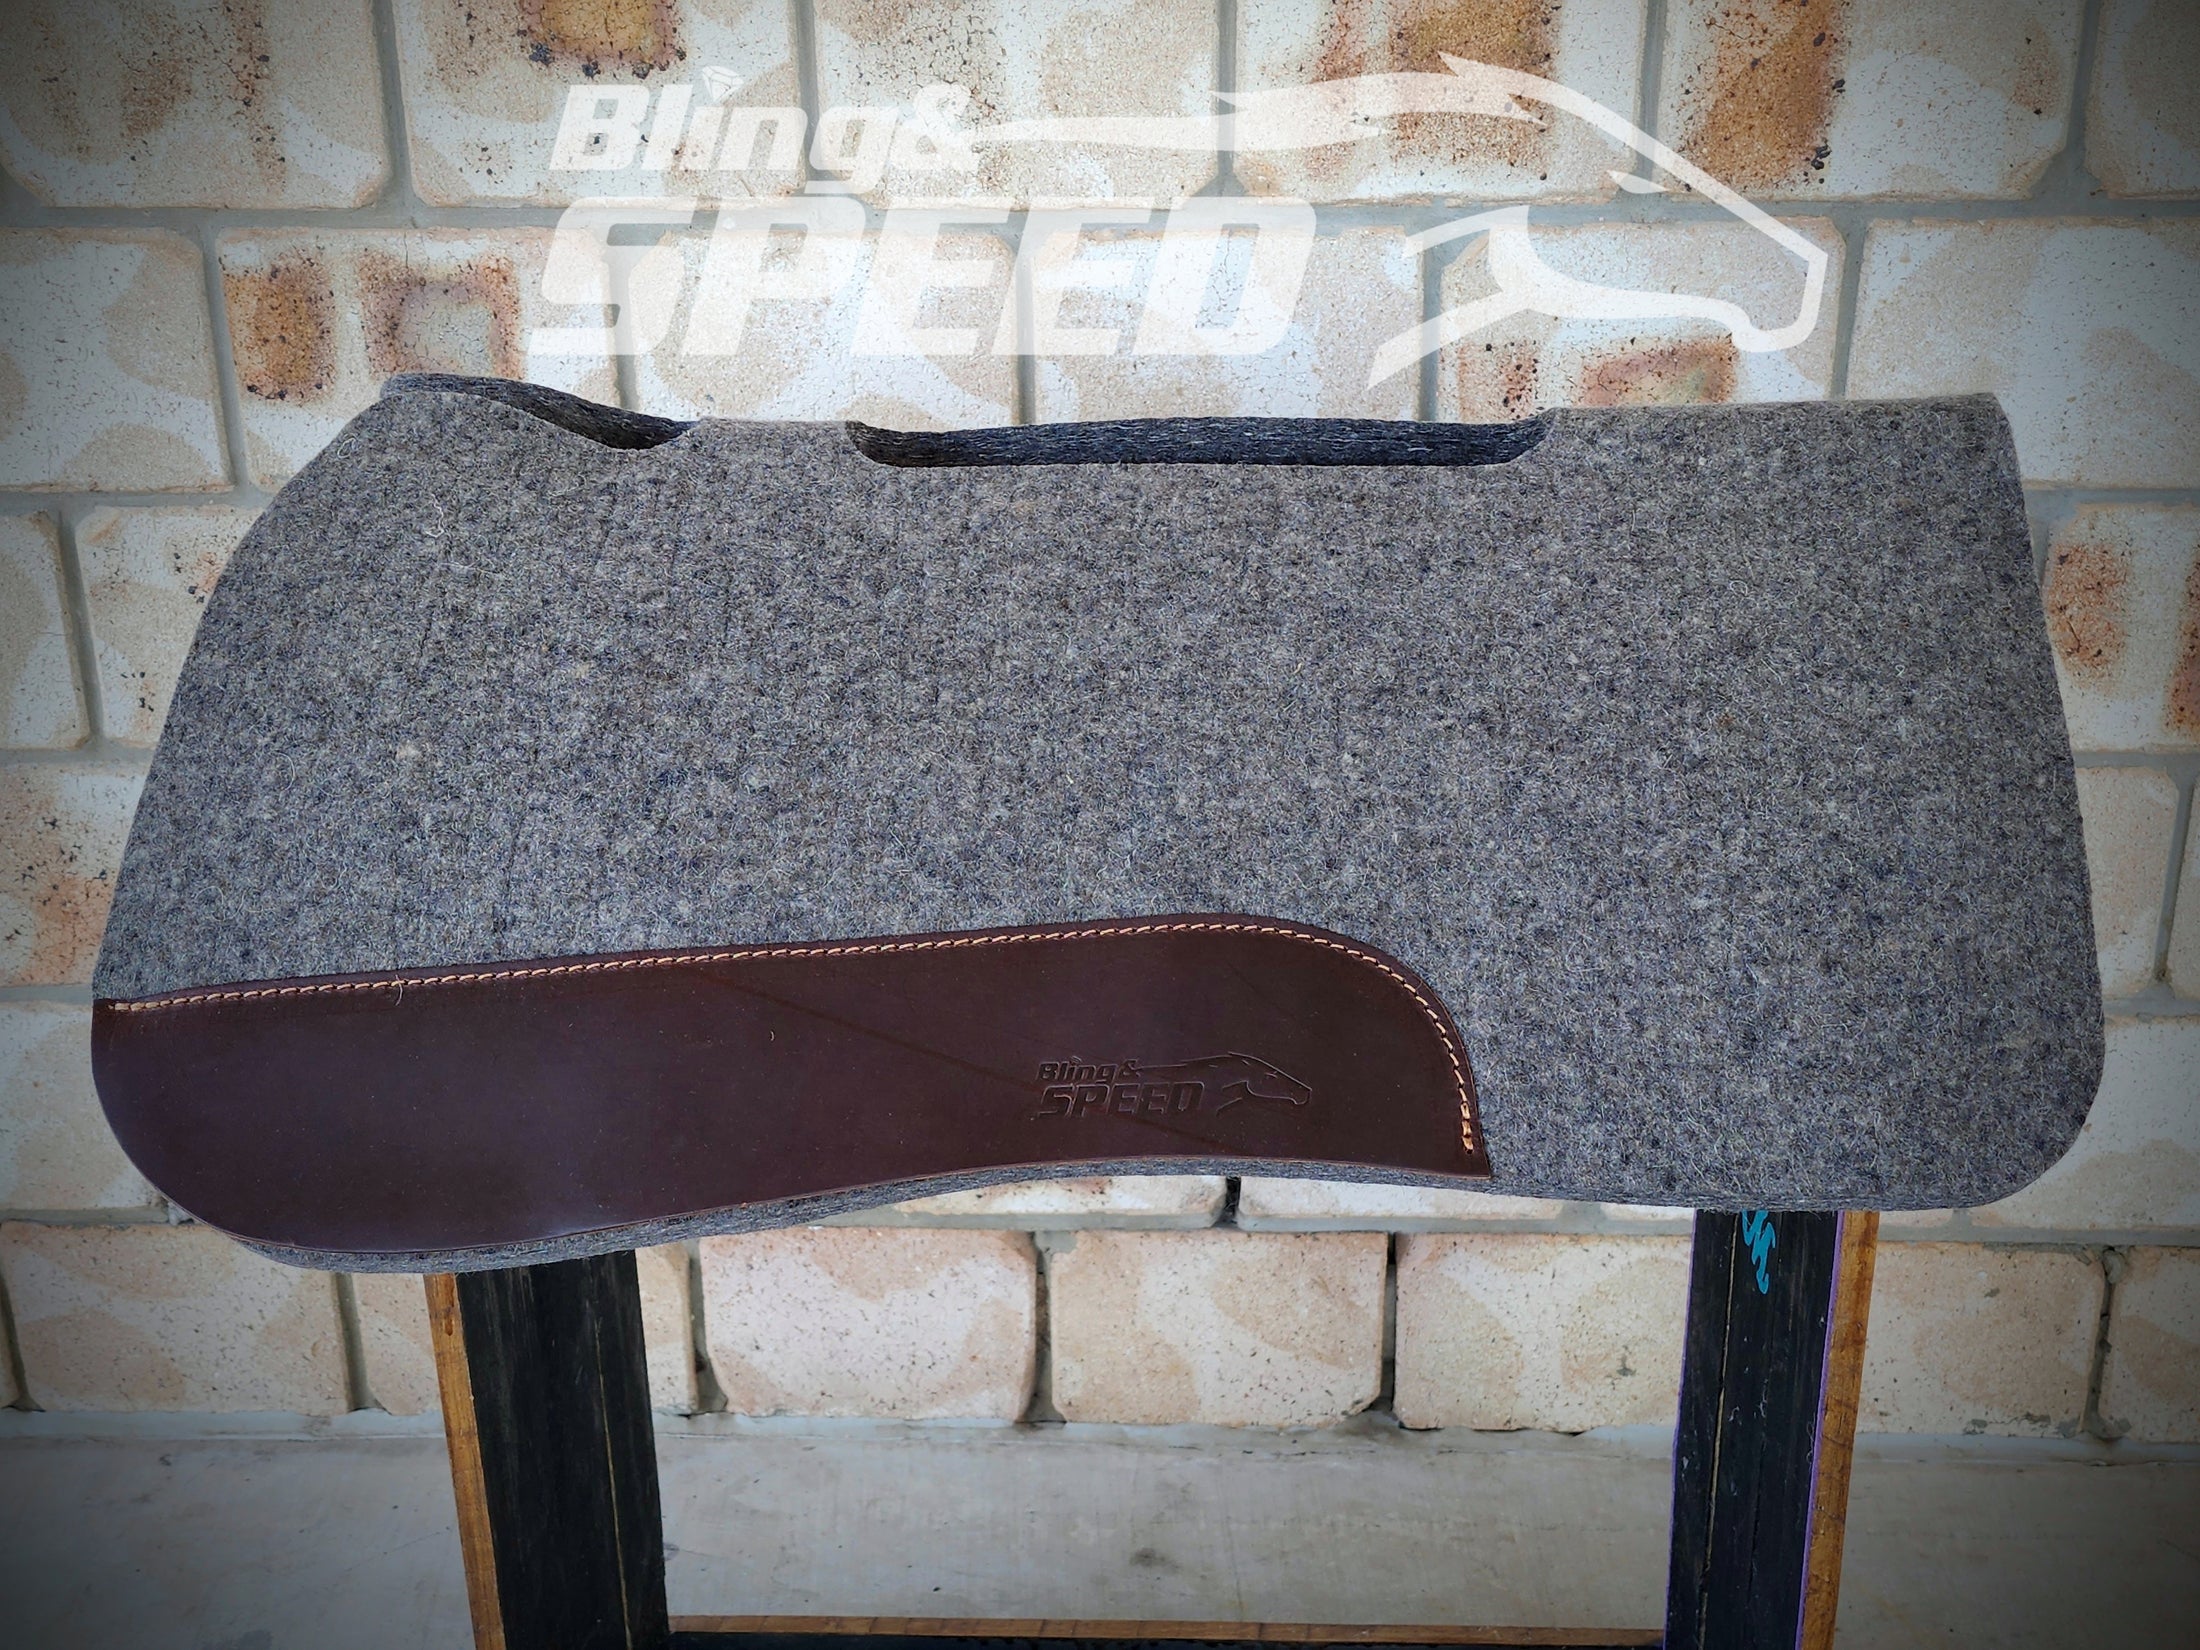 Wither and Spine Relief Felt Saddle Pad - Charcoal (7907540566254)